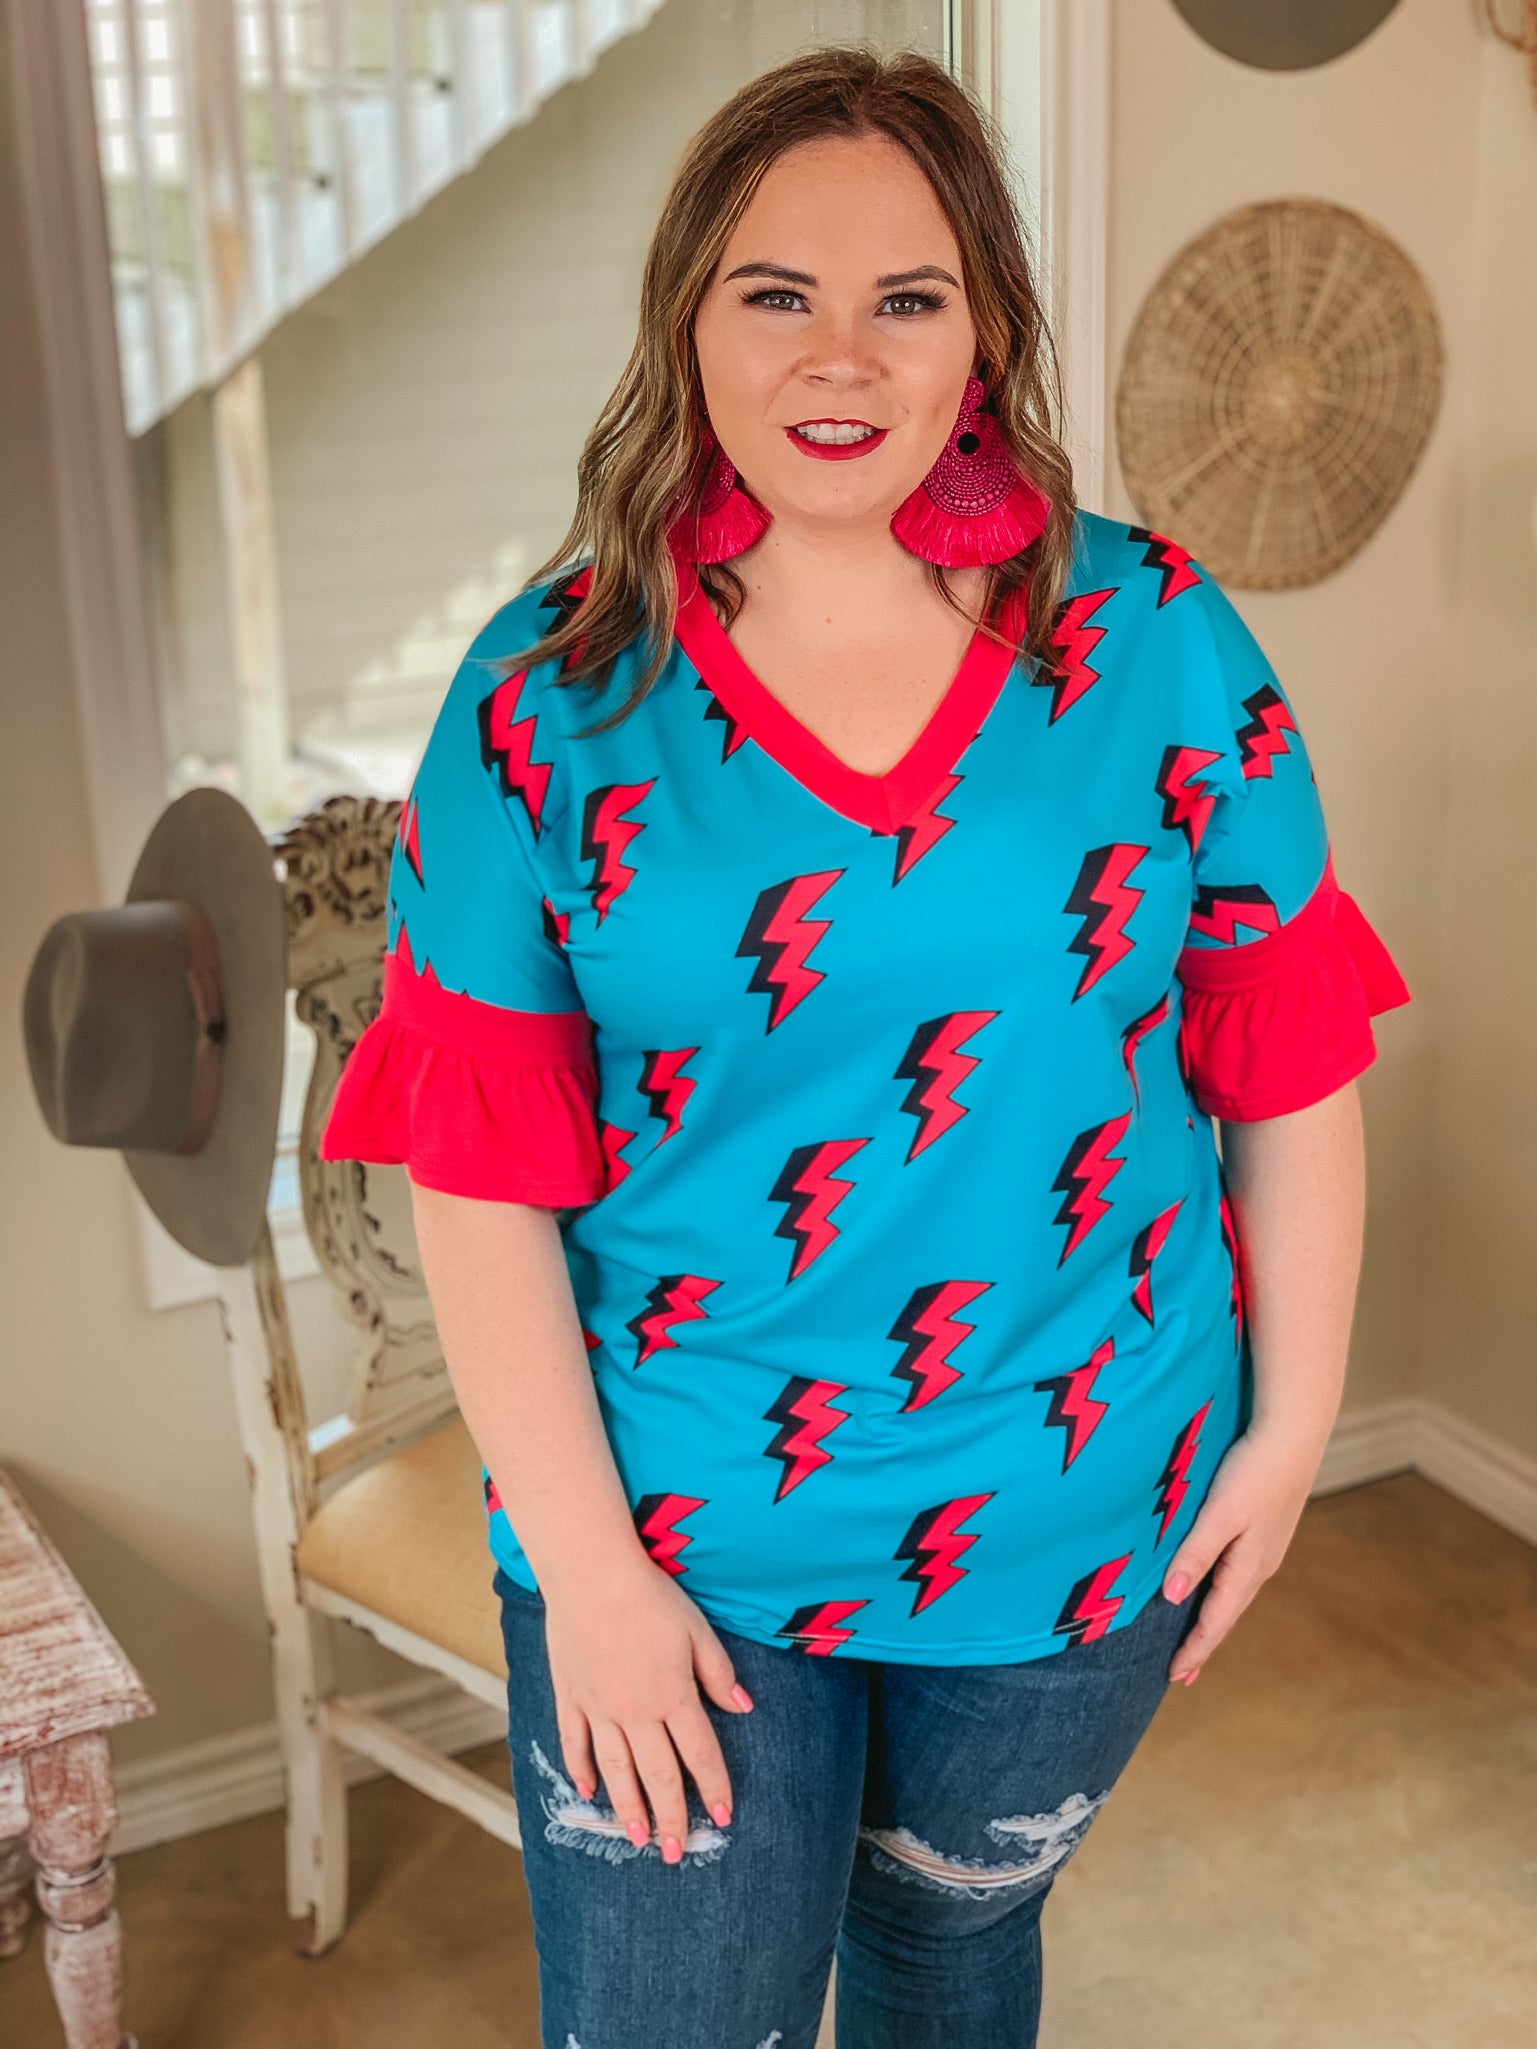 Last Chance Size S, M, & L | Saved By the Bell Fuchsia Lightning Bolt V Neck Top with Ruffle Sleeves in Turquoise - Giddy Up Glamour Boutique